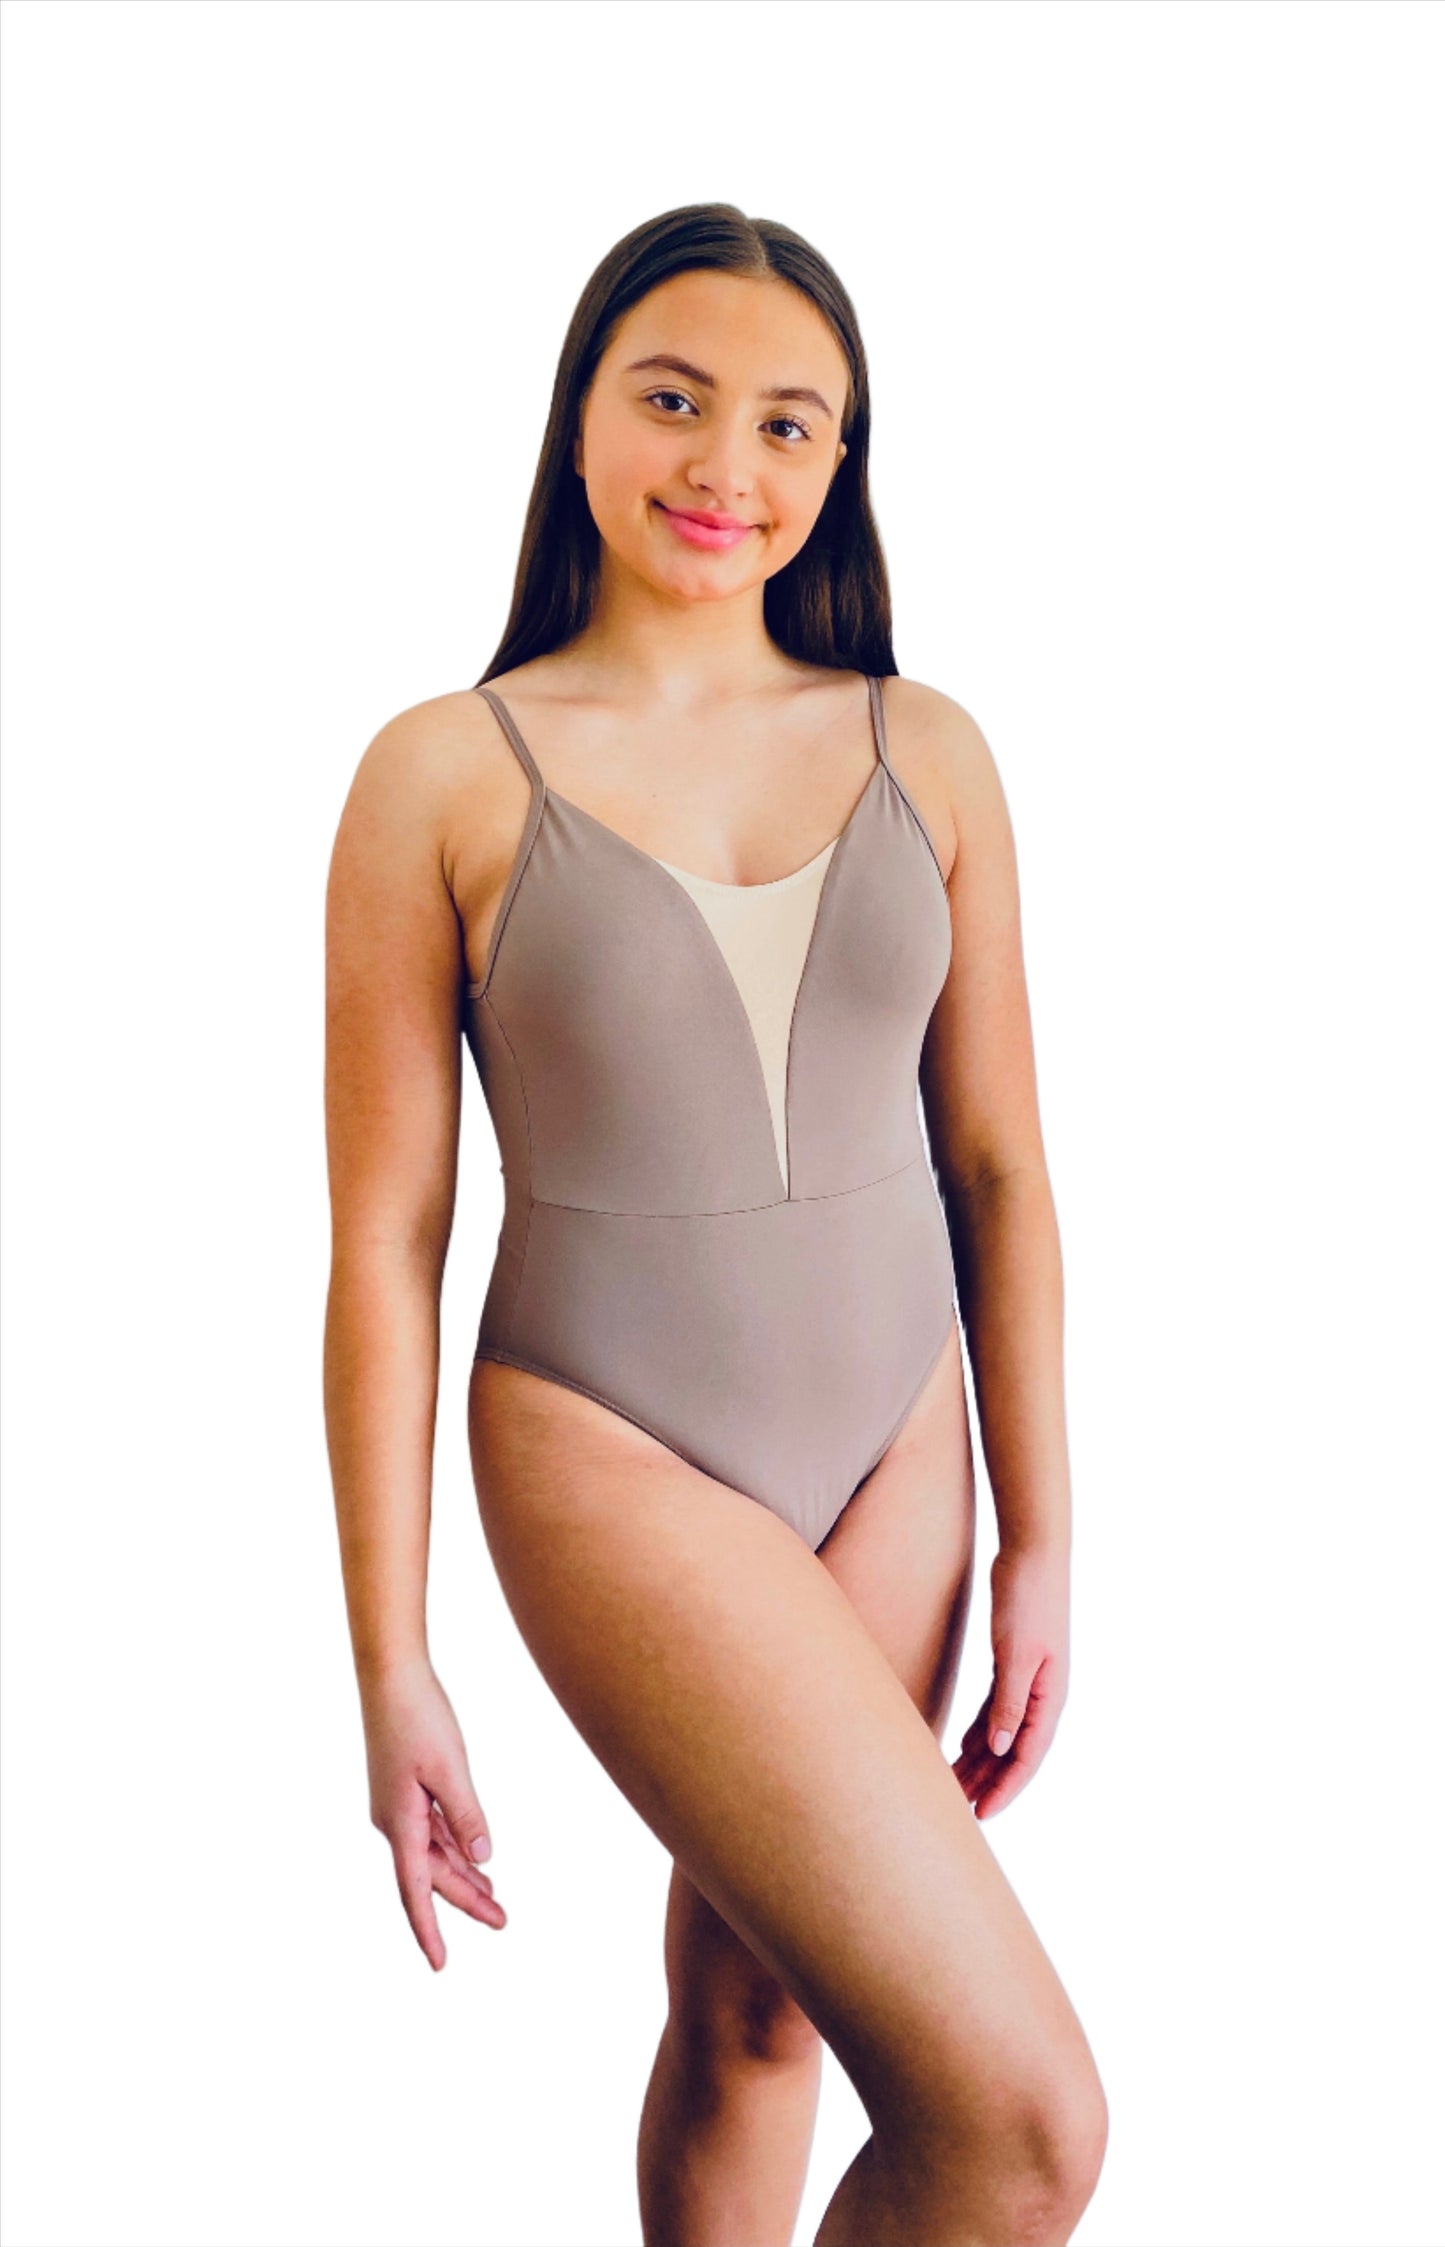 Sand / beige coloured camisole ballet leotard with deep v at front and deep back from The Collective DancewearV Mesh Camisole Leotard for ballet - Sand with sand coloured strap from the collective dancewear